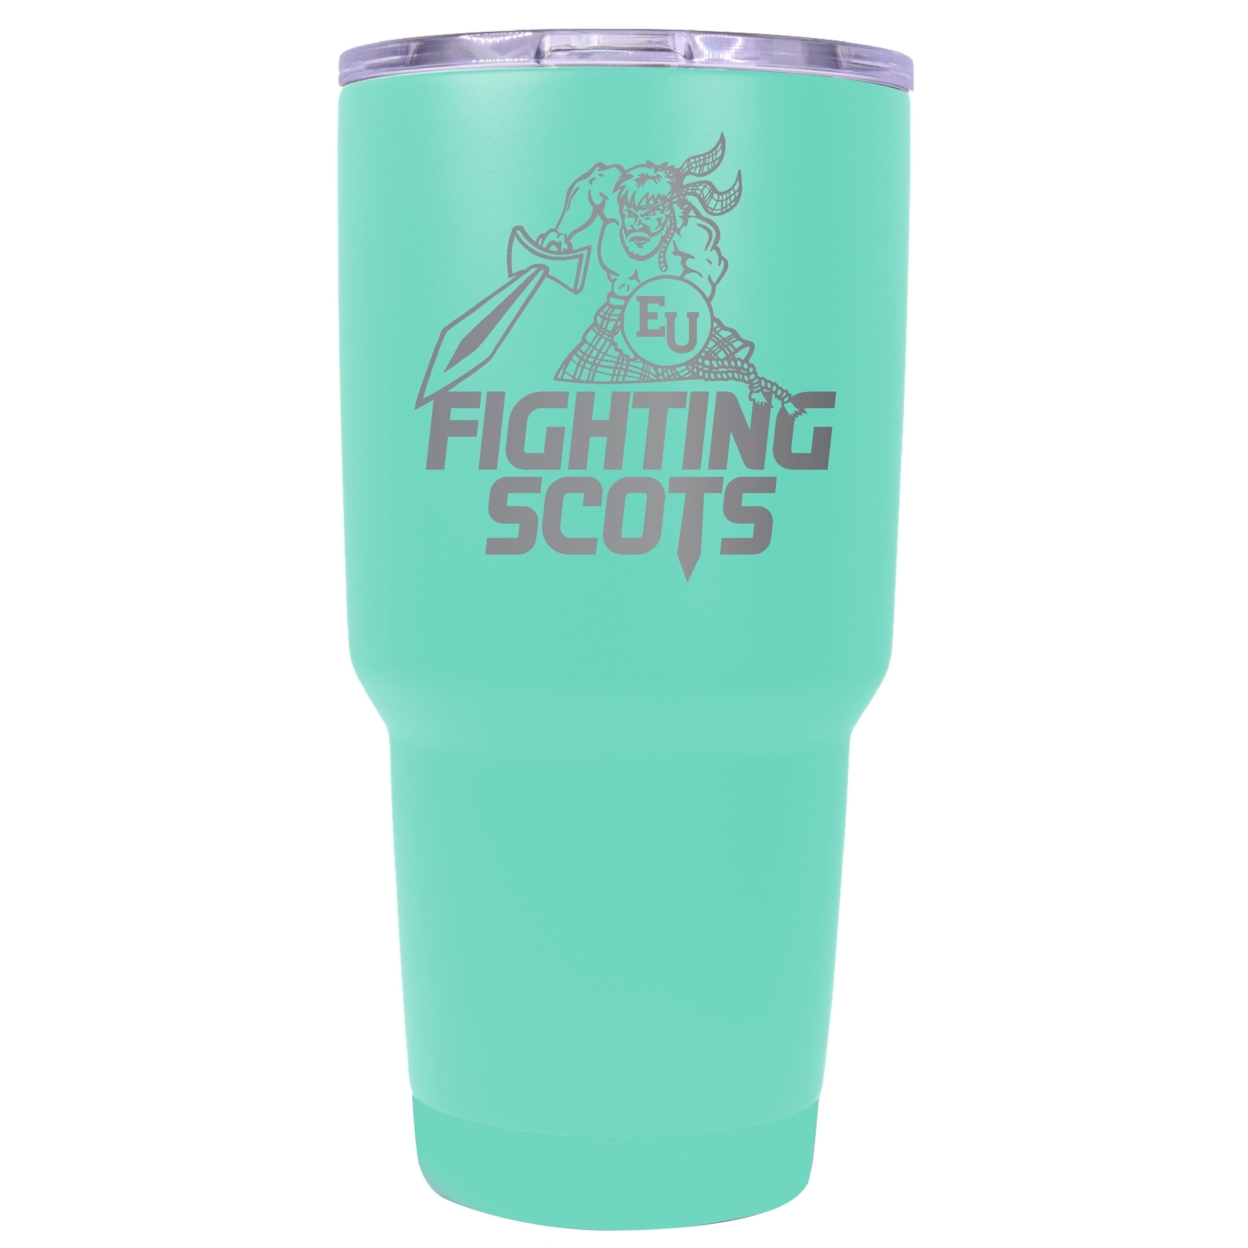 Edinboro University 24 Oz Laser Engraved Stainless Steel Insulated Tumbler - Choose Your Color. - Seafoam